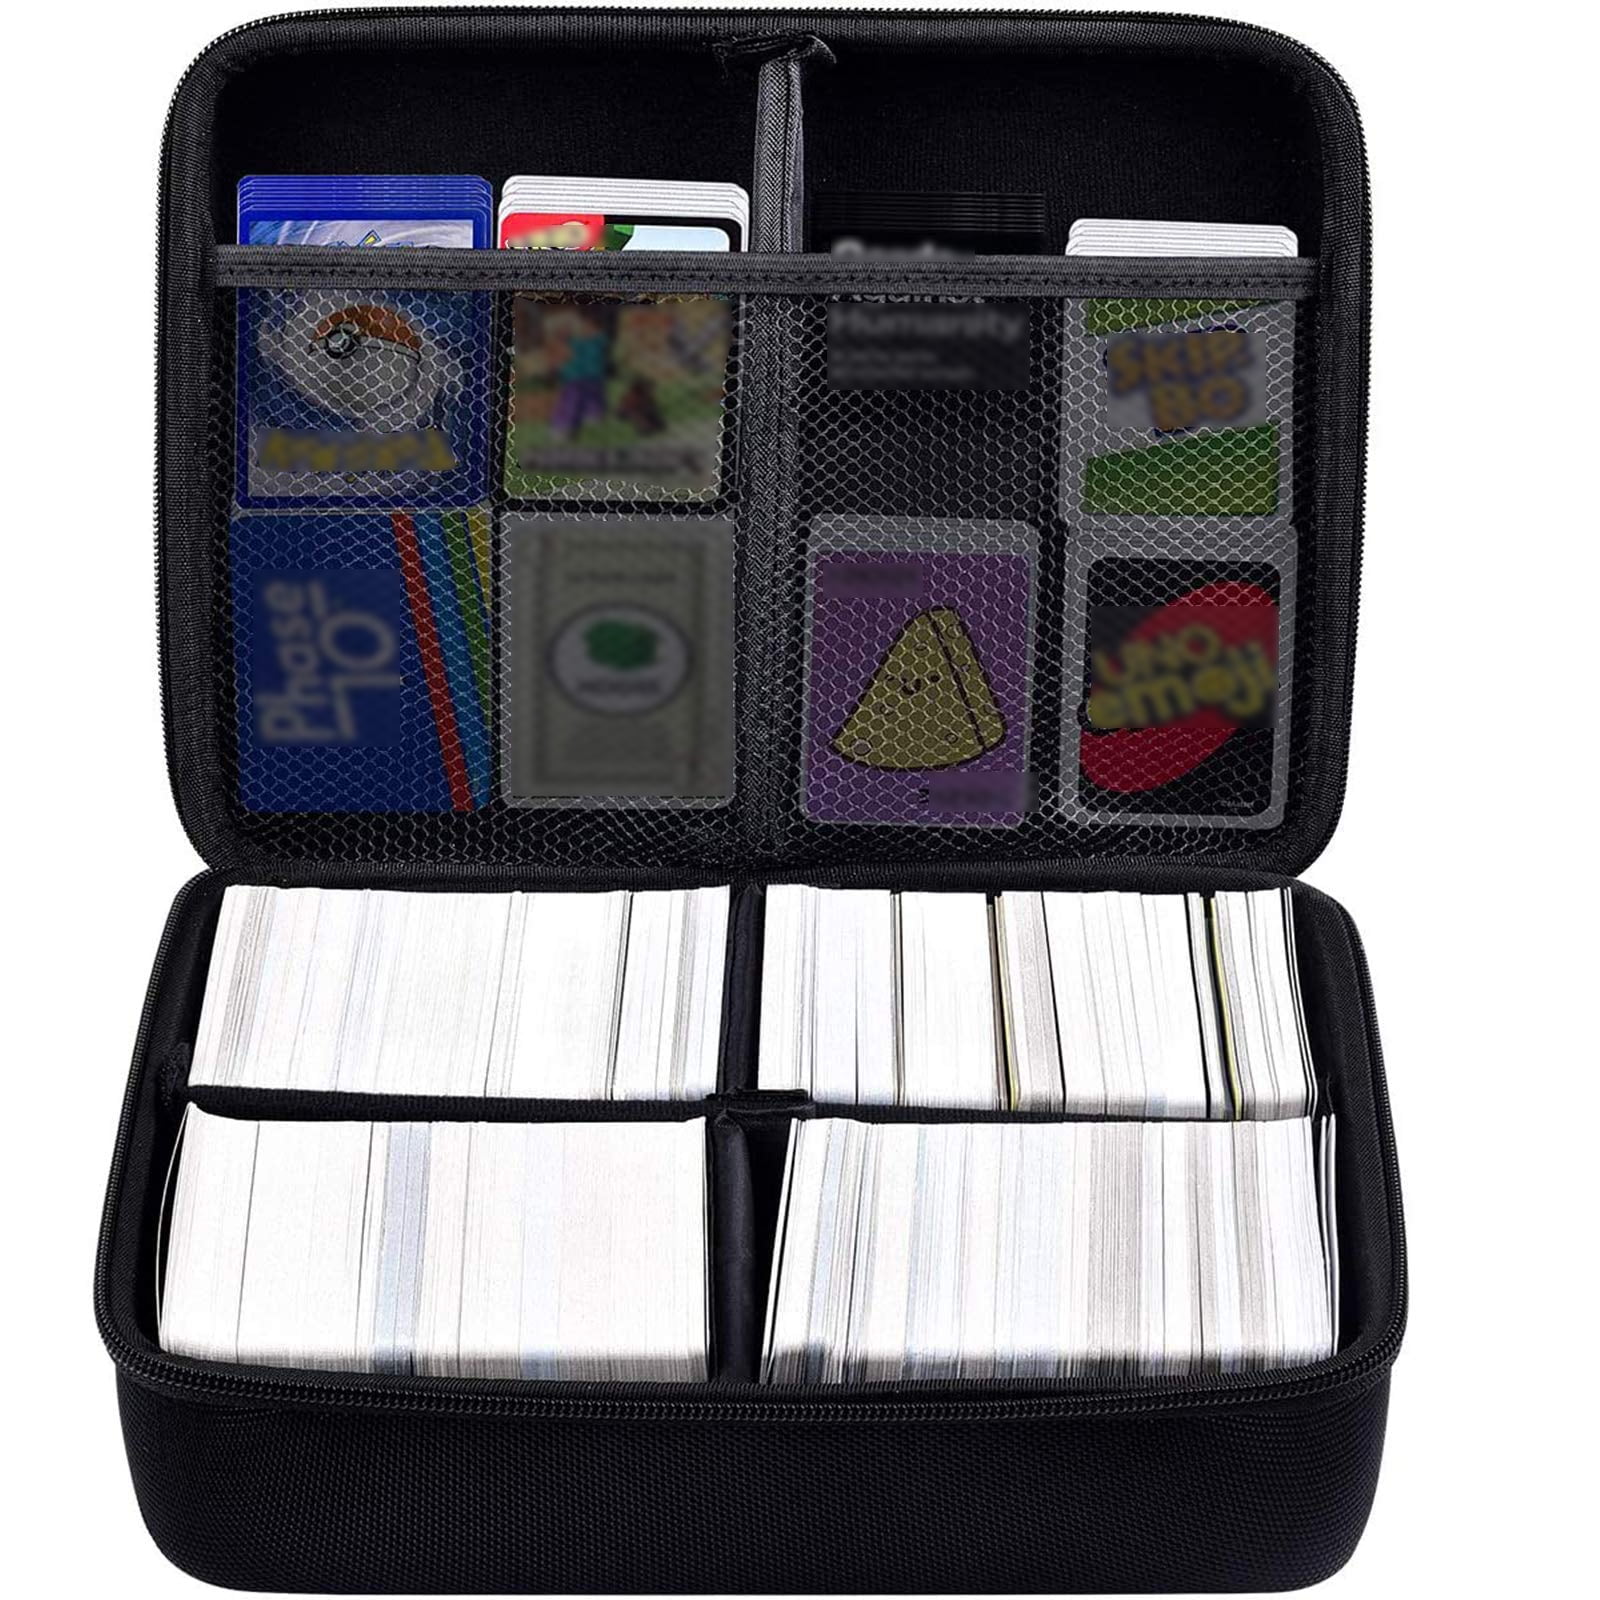 Cards Against Humanity New Travel Carry Storage Hard Case Box Bag for Against Humanity Card Games Q6H2 191466432297 